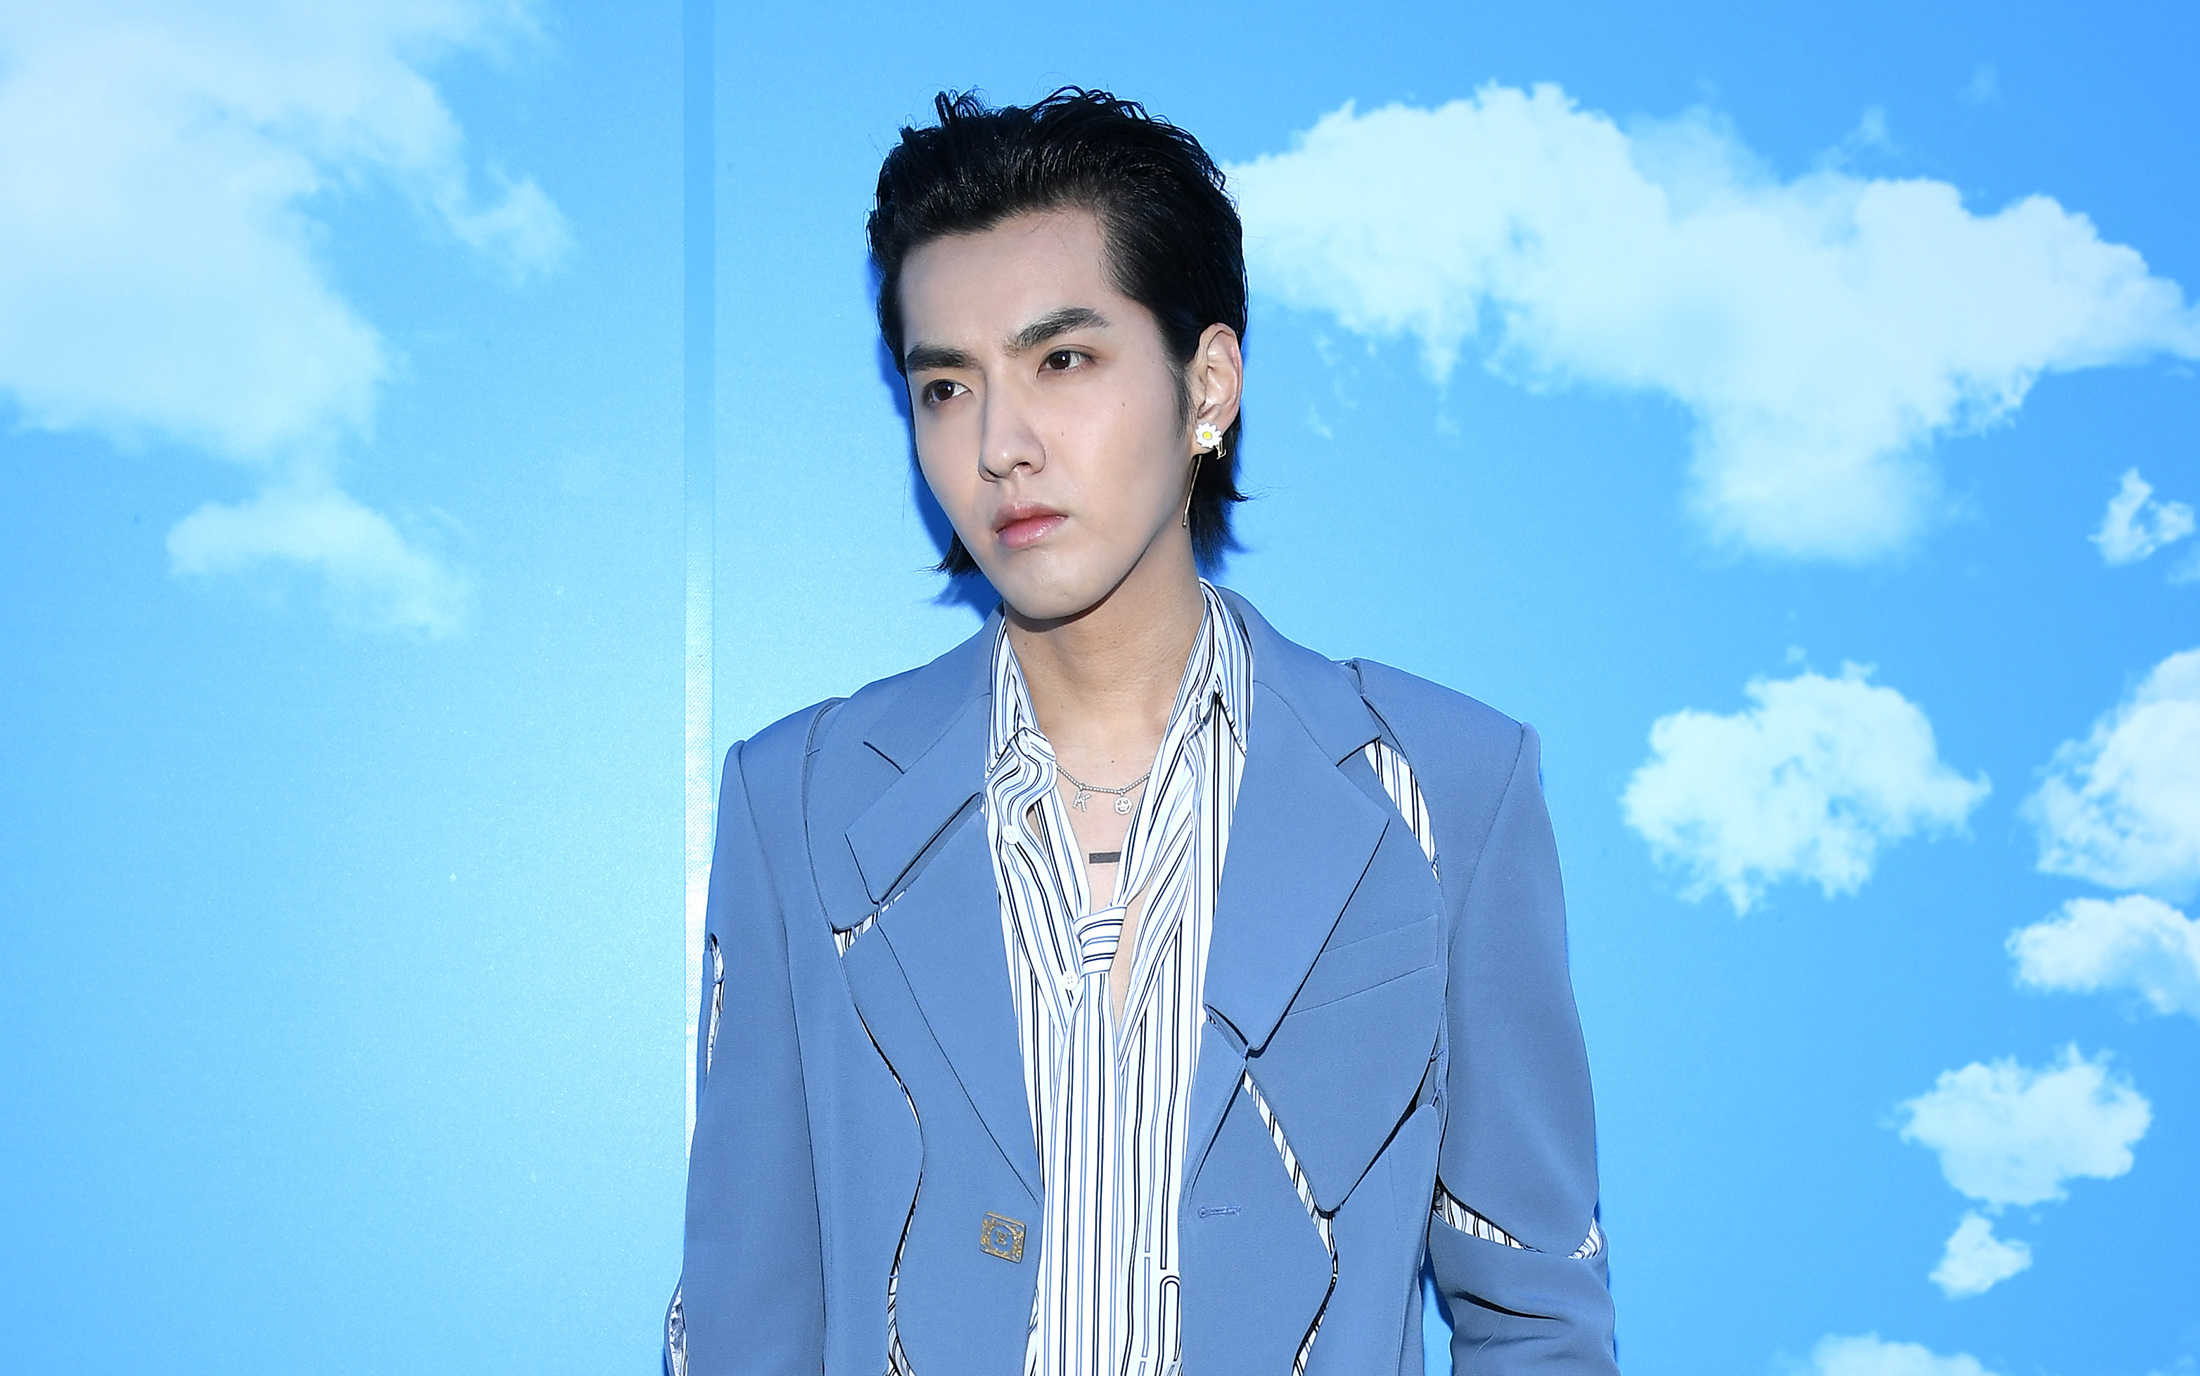 Chinese Pop Star Kris Wu Dumped by Porsche, Bulgari After Sex Accusation -  Bloomberg